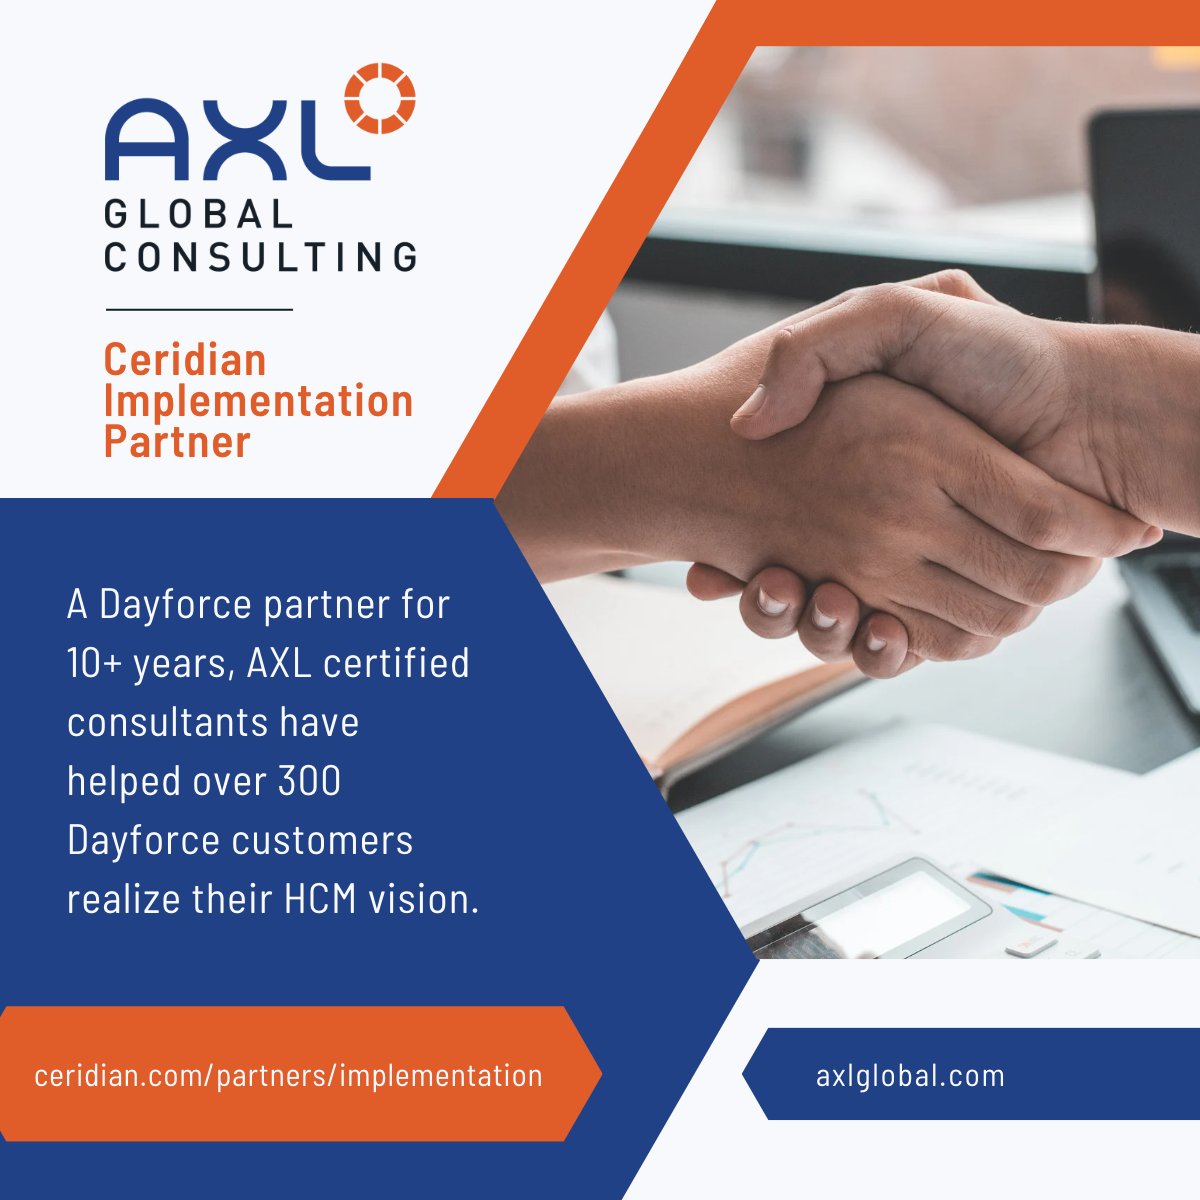 AXL Global Consulting is a Ceridian Implementation Partner! We are the leading firm dedicated to successful deployments of Dayforce Human Capital Management (HCM) solutions. #Dayforce #Ceridian #implementationpartner #softwareconsulting